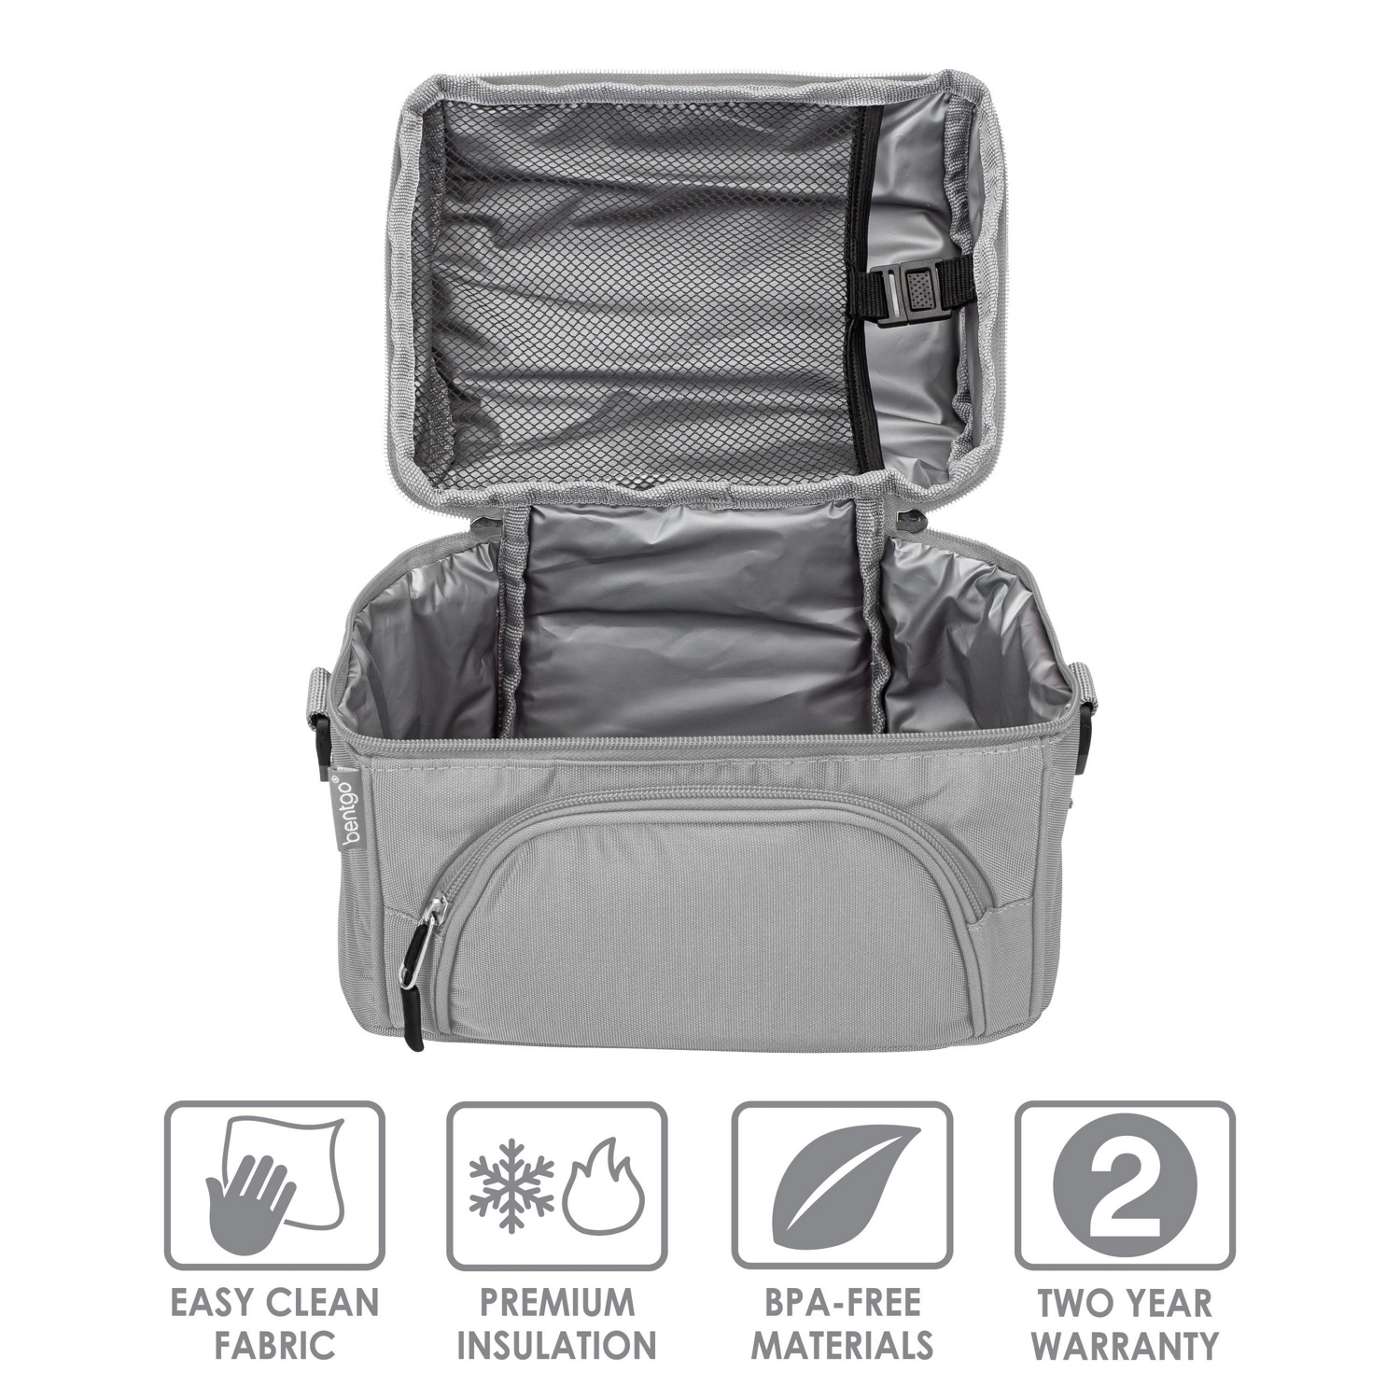  Bentgo® Deluxe Lunch Bag - Durable and Insulated Lunch